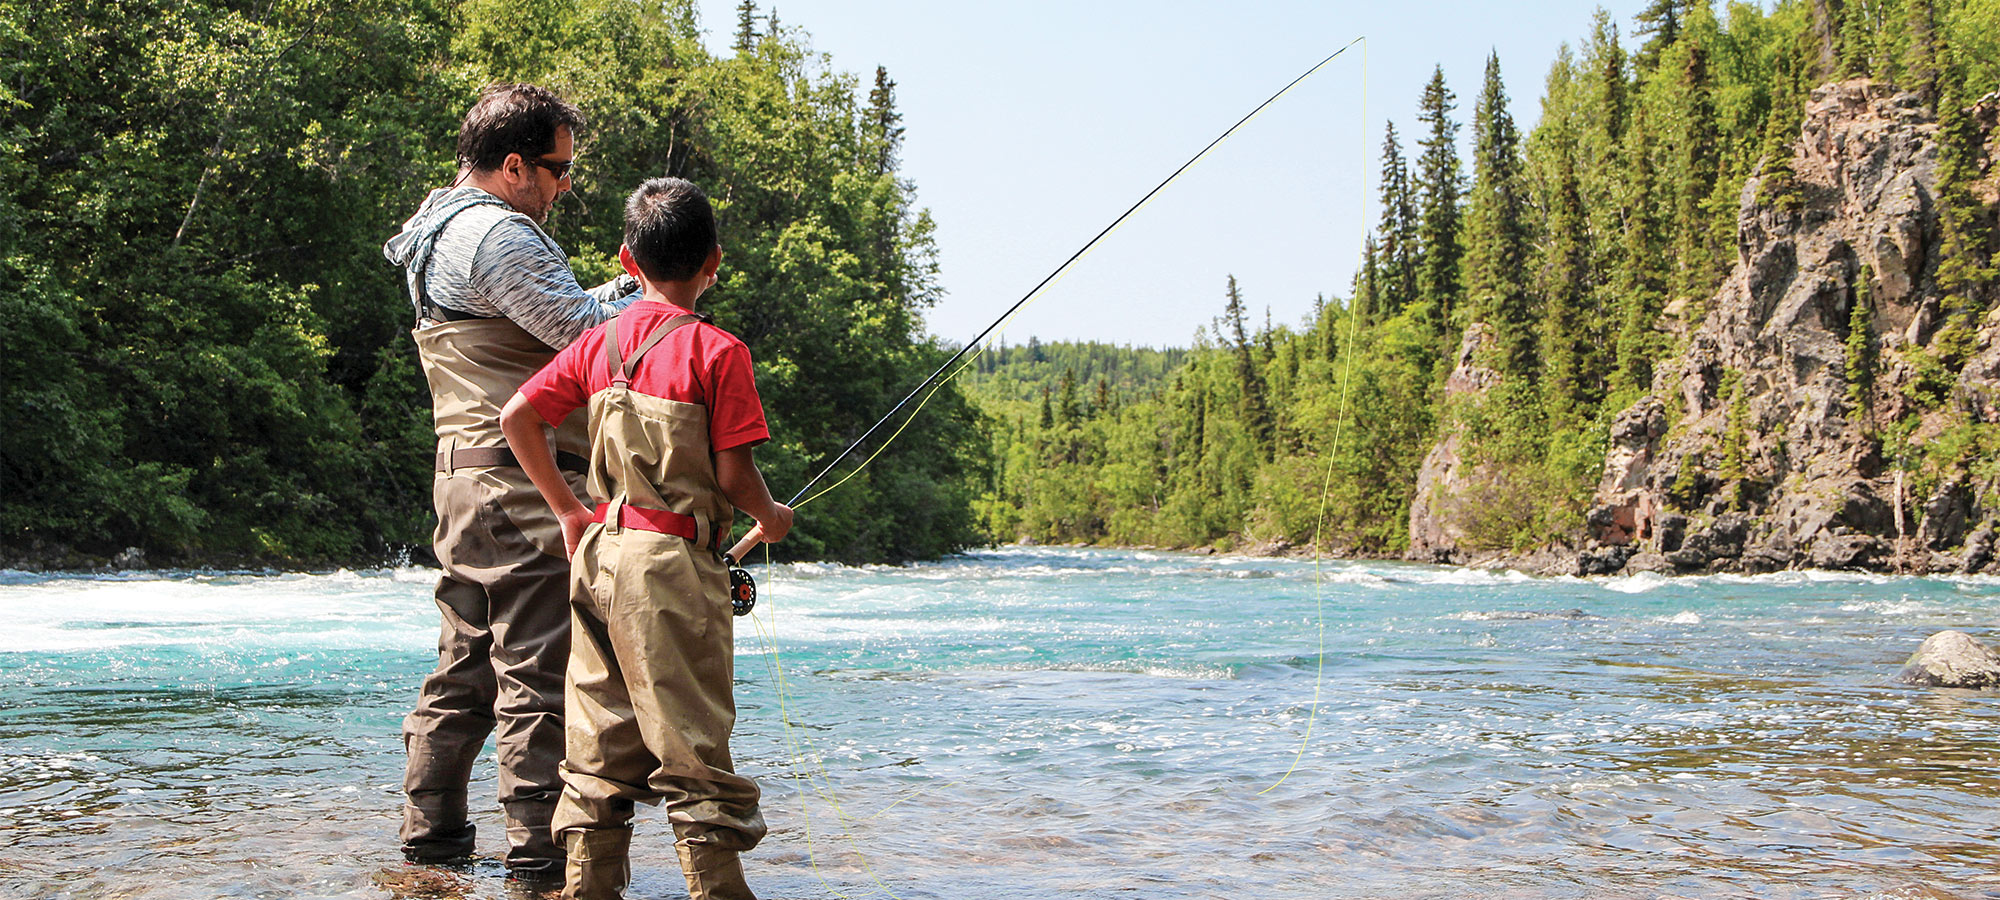 Boys in Big Country: A Father-Son Fishing Trip to Alaska